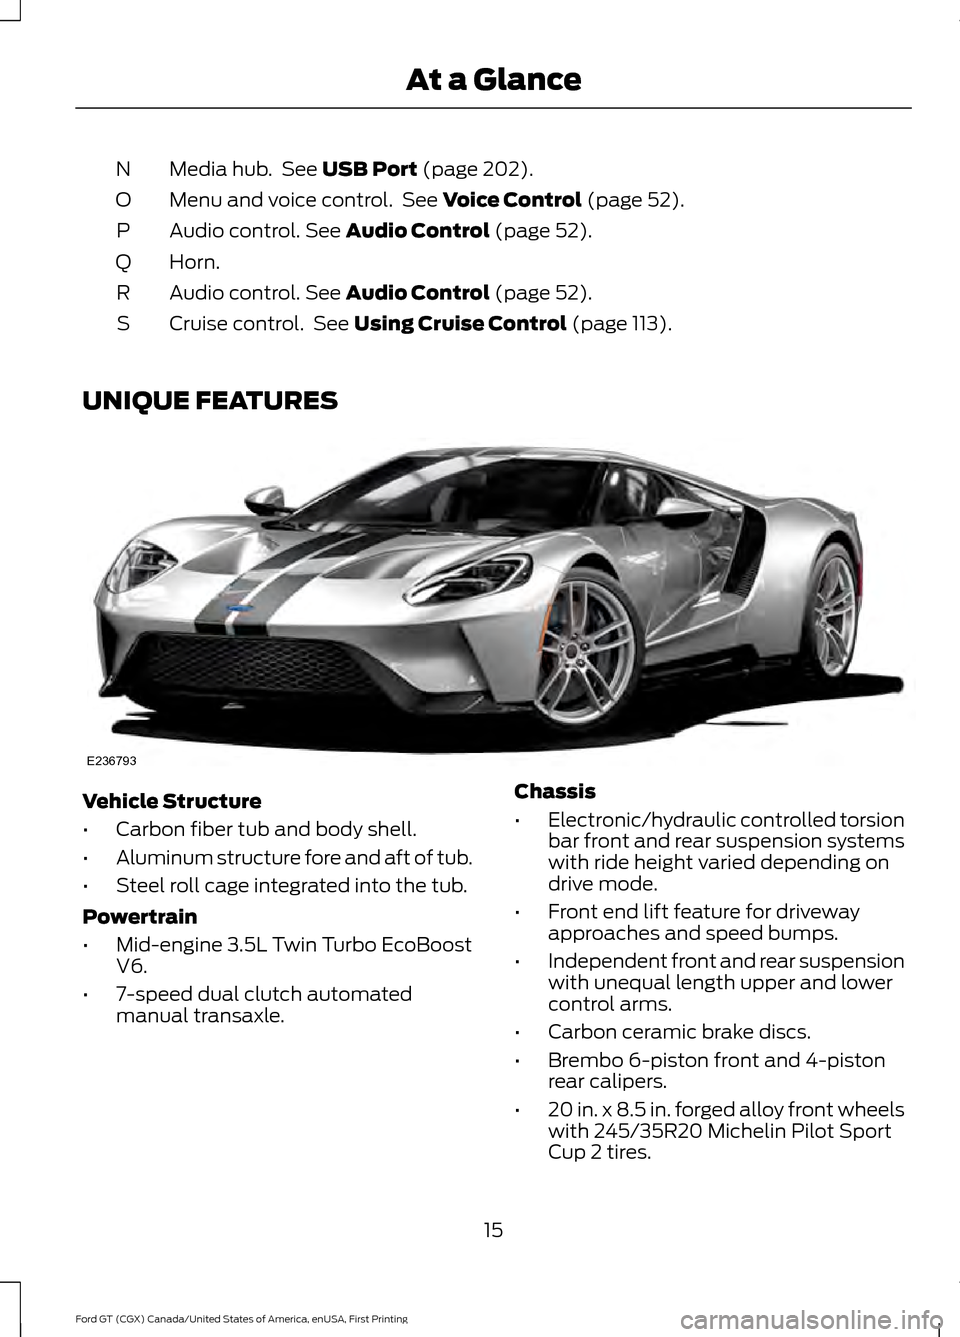 FORD GT 2017 2.G User Guide Media hub.  See USB Port (page 202).
N
Menu and voice control.  See 
Voice Control (page 52).
O
Audio control.
 See Audio Control (page 52).
P
Horn.
Q
Audio control.
 See Audio Control (page 52).
R
Cr